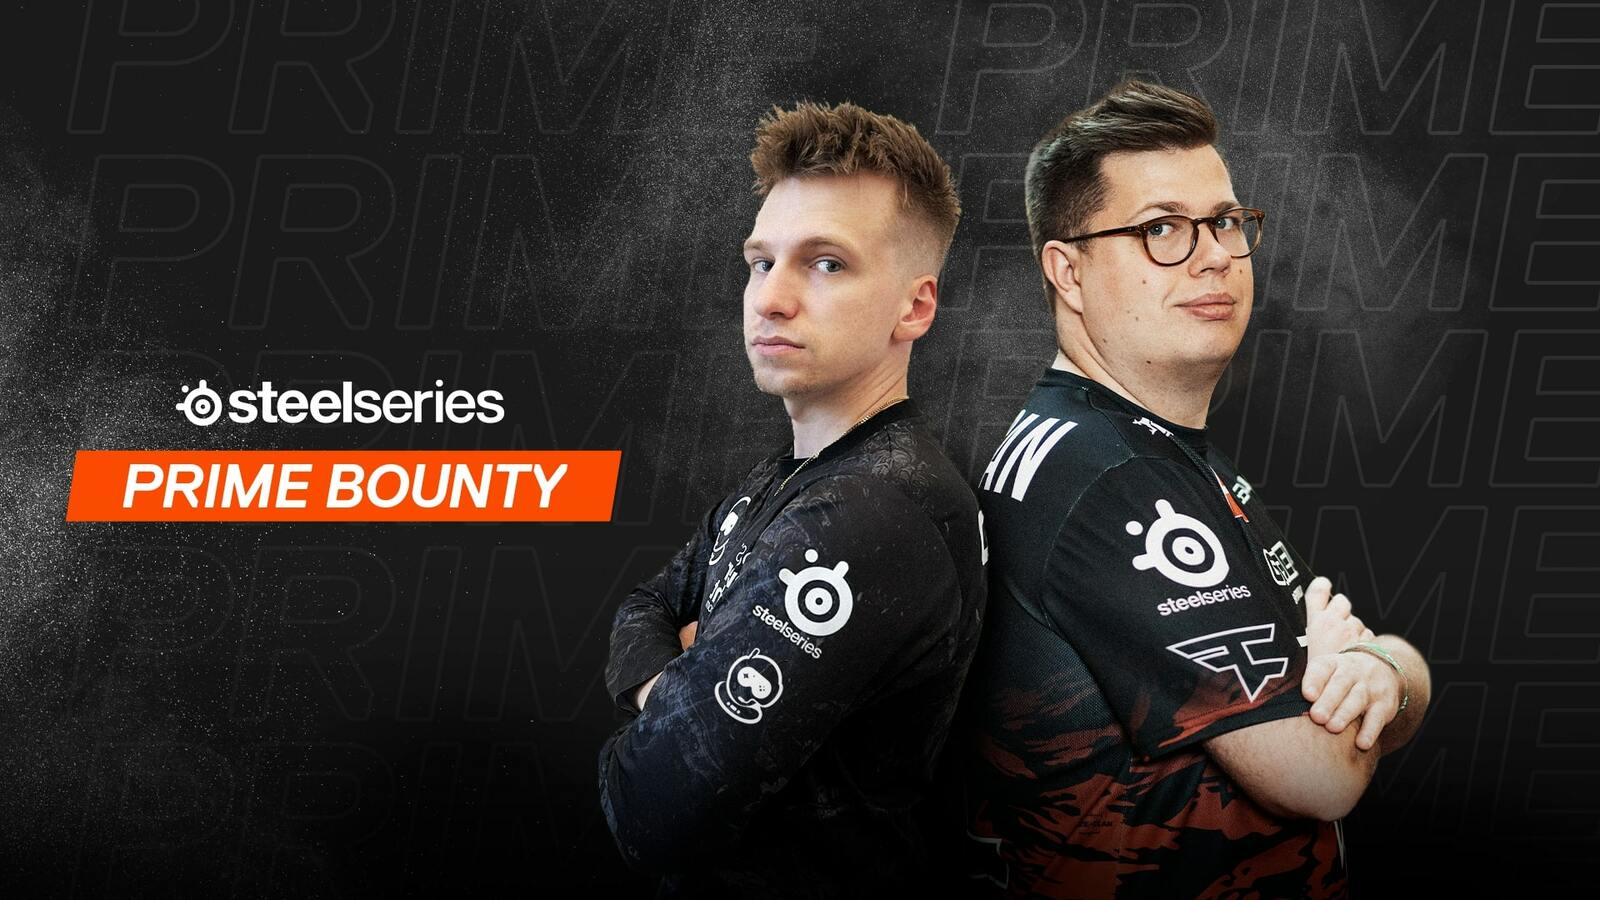 Karrigan and another esports player stand back to back for SteelSeries Prime Bounty graphic